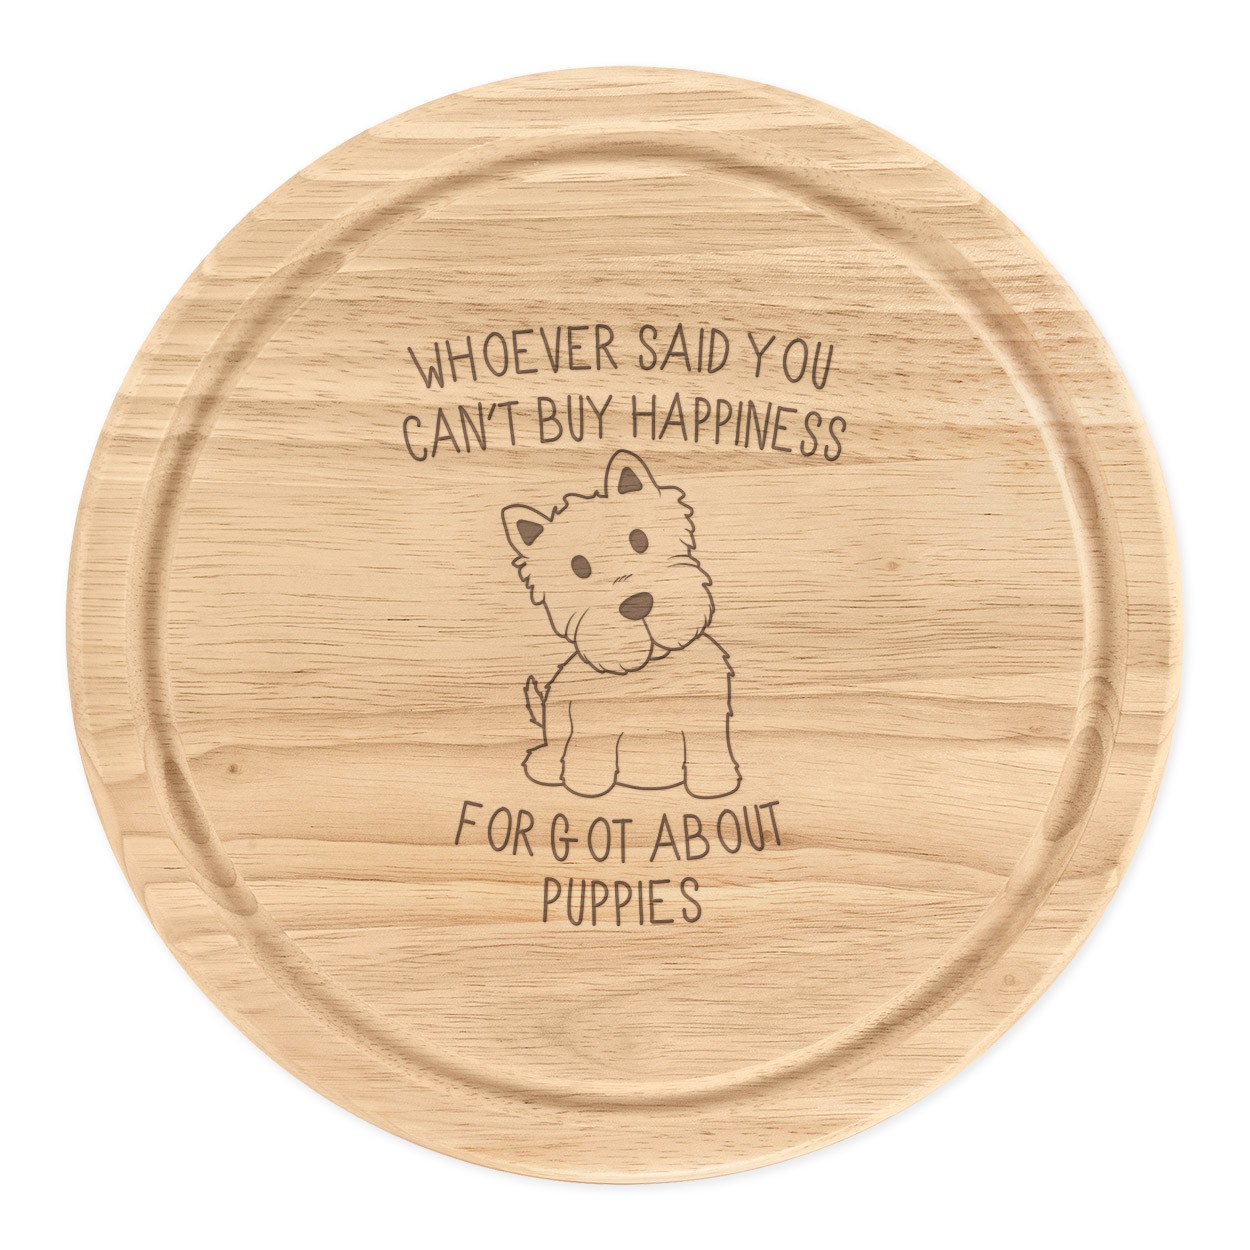 Whoever Said You Can't Buy Happiness Forgot About Puppies Wooden Chopping Cheese Board Round 25cm